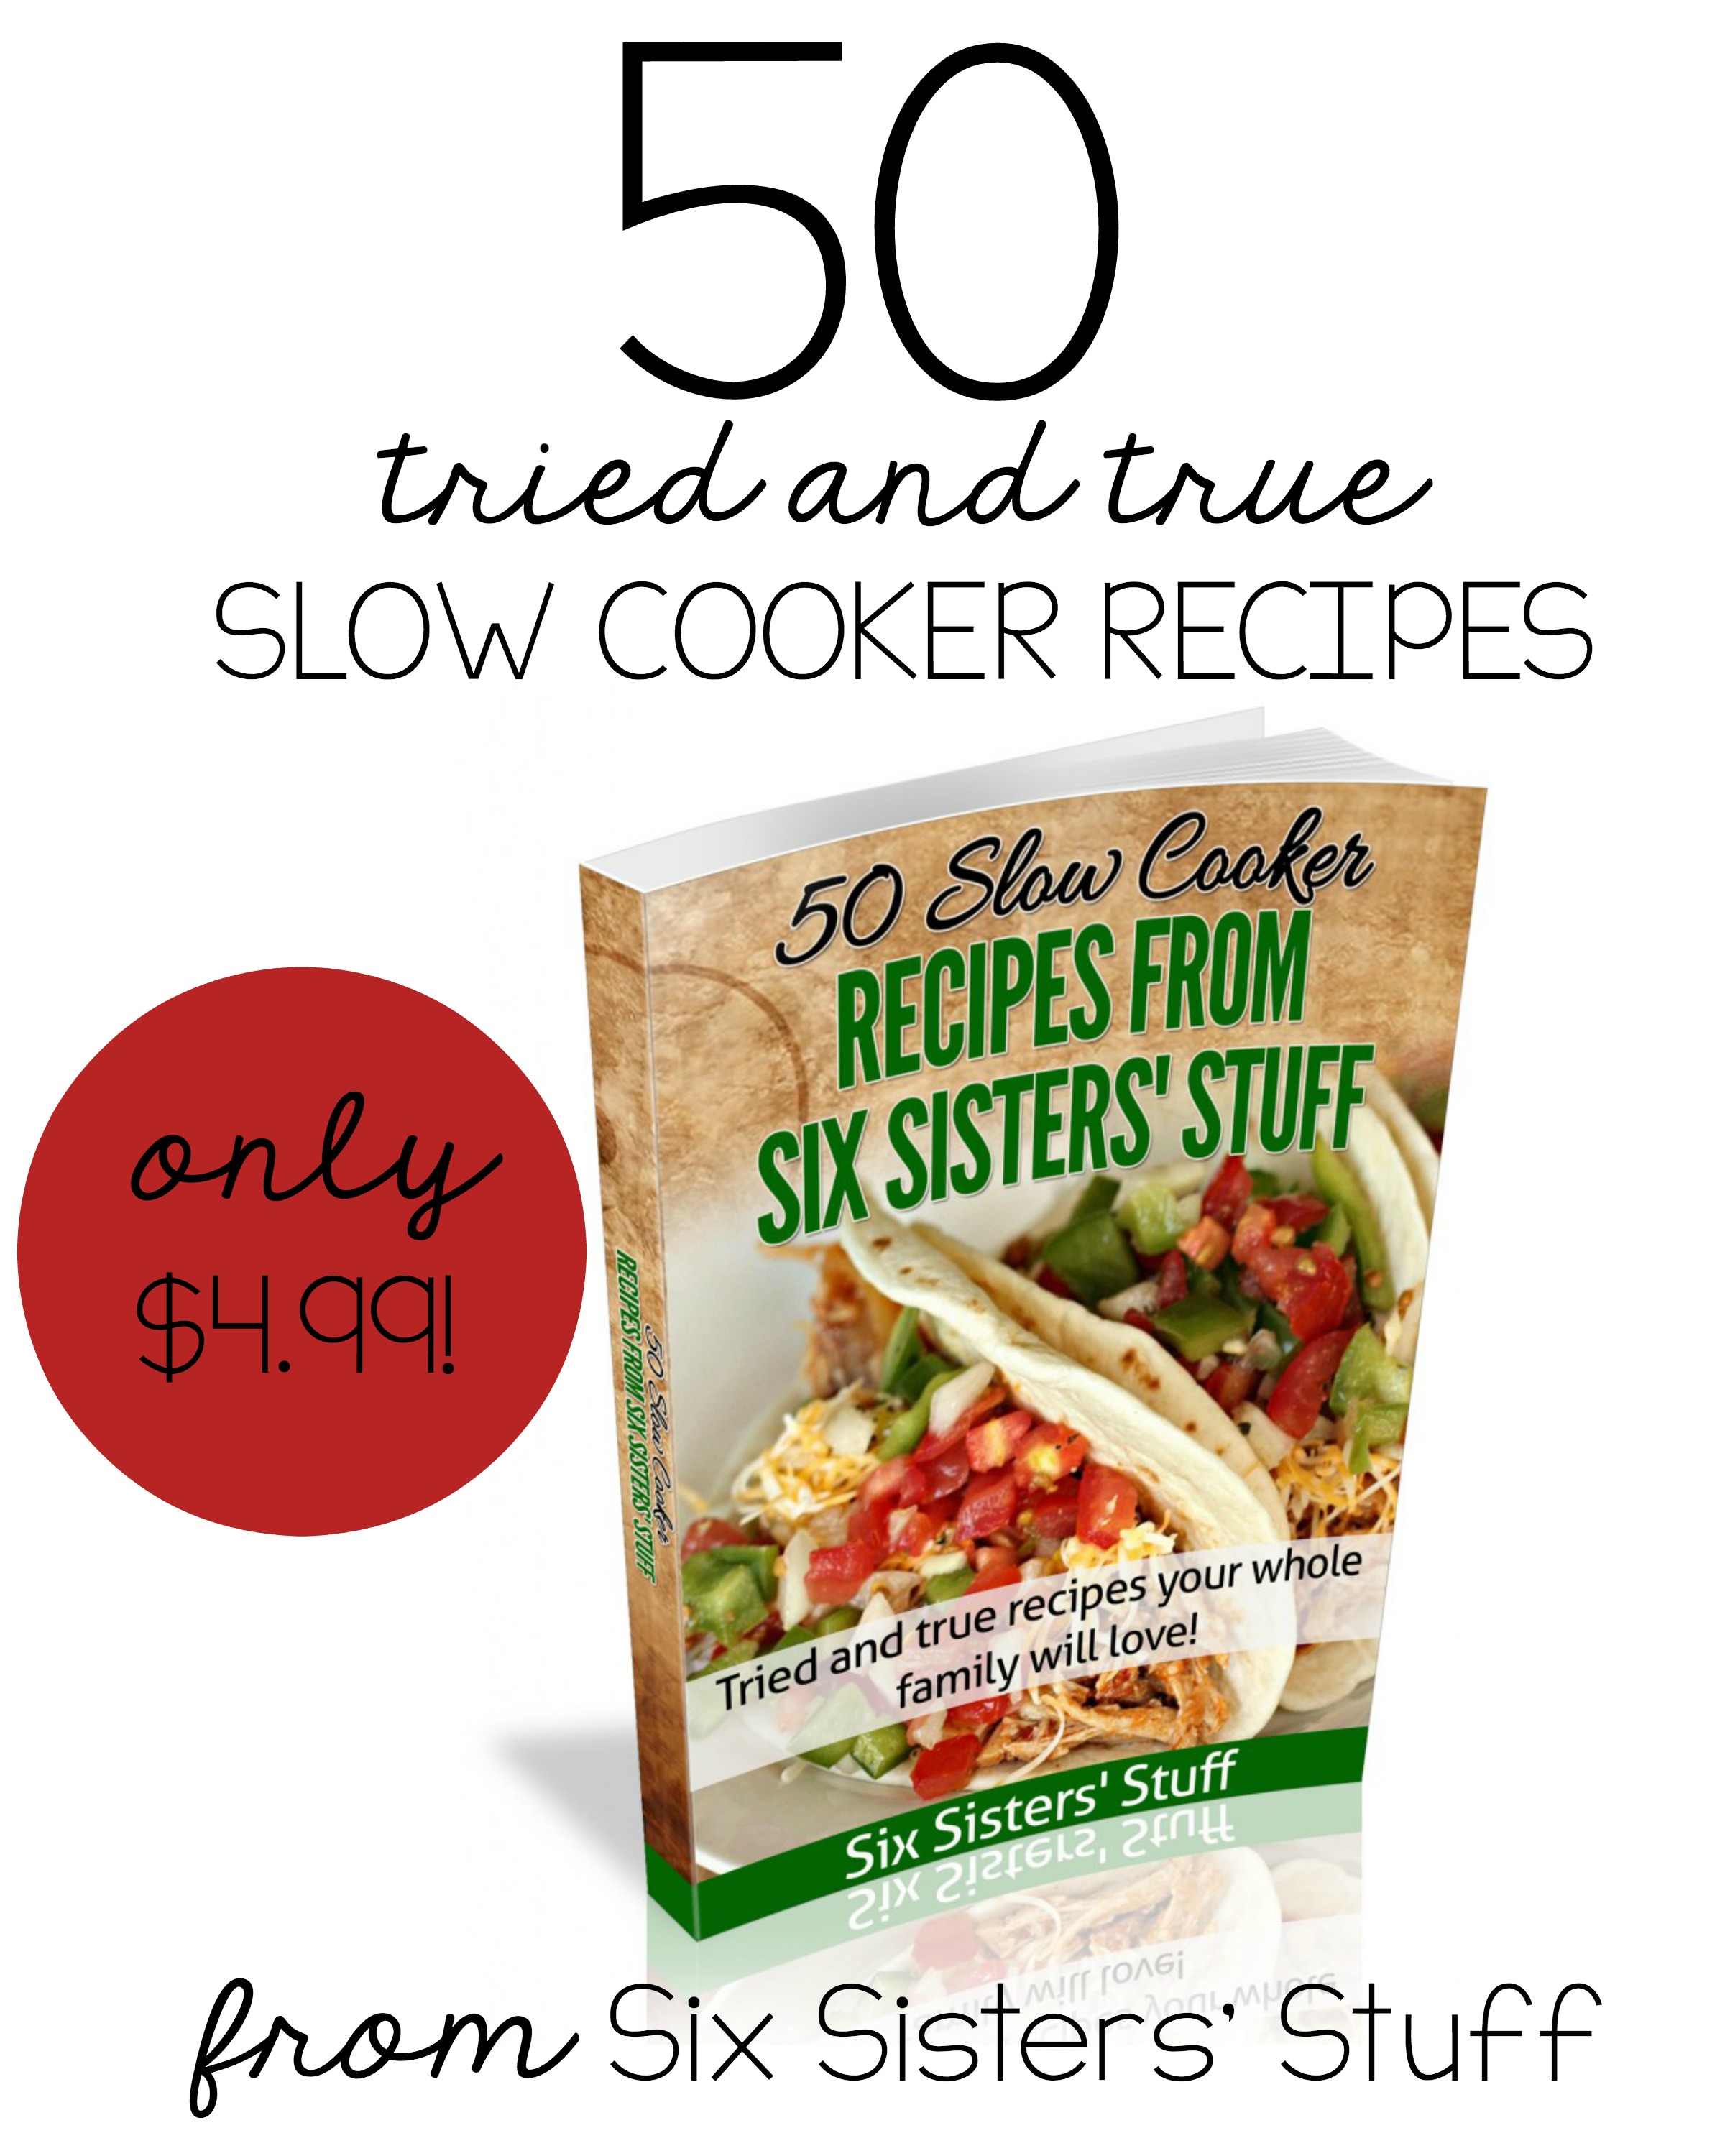 50 of the BEST Slow Cooker Recipes eCookbook from Six Sisters’ Stuff